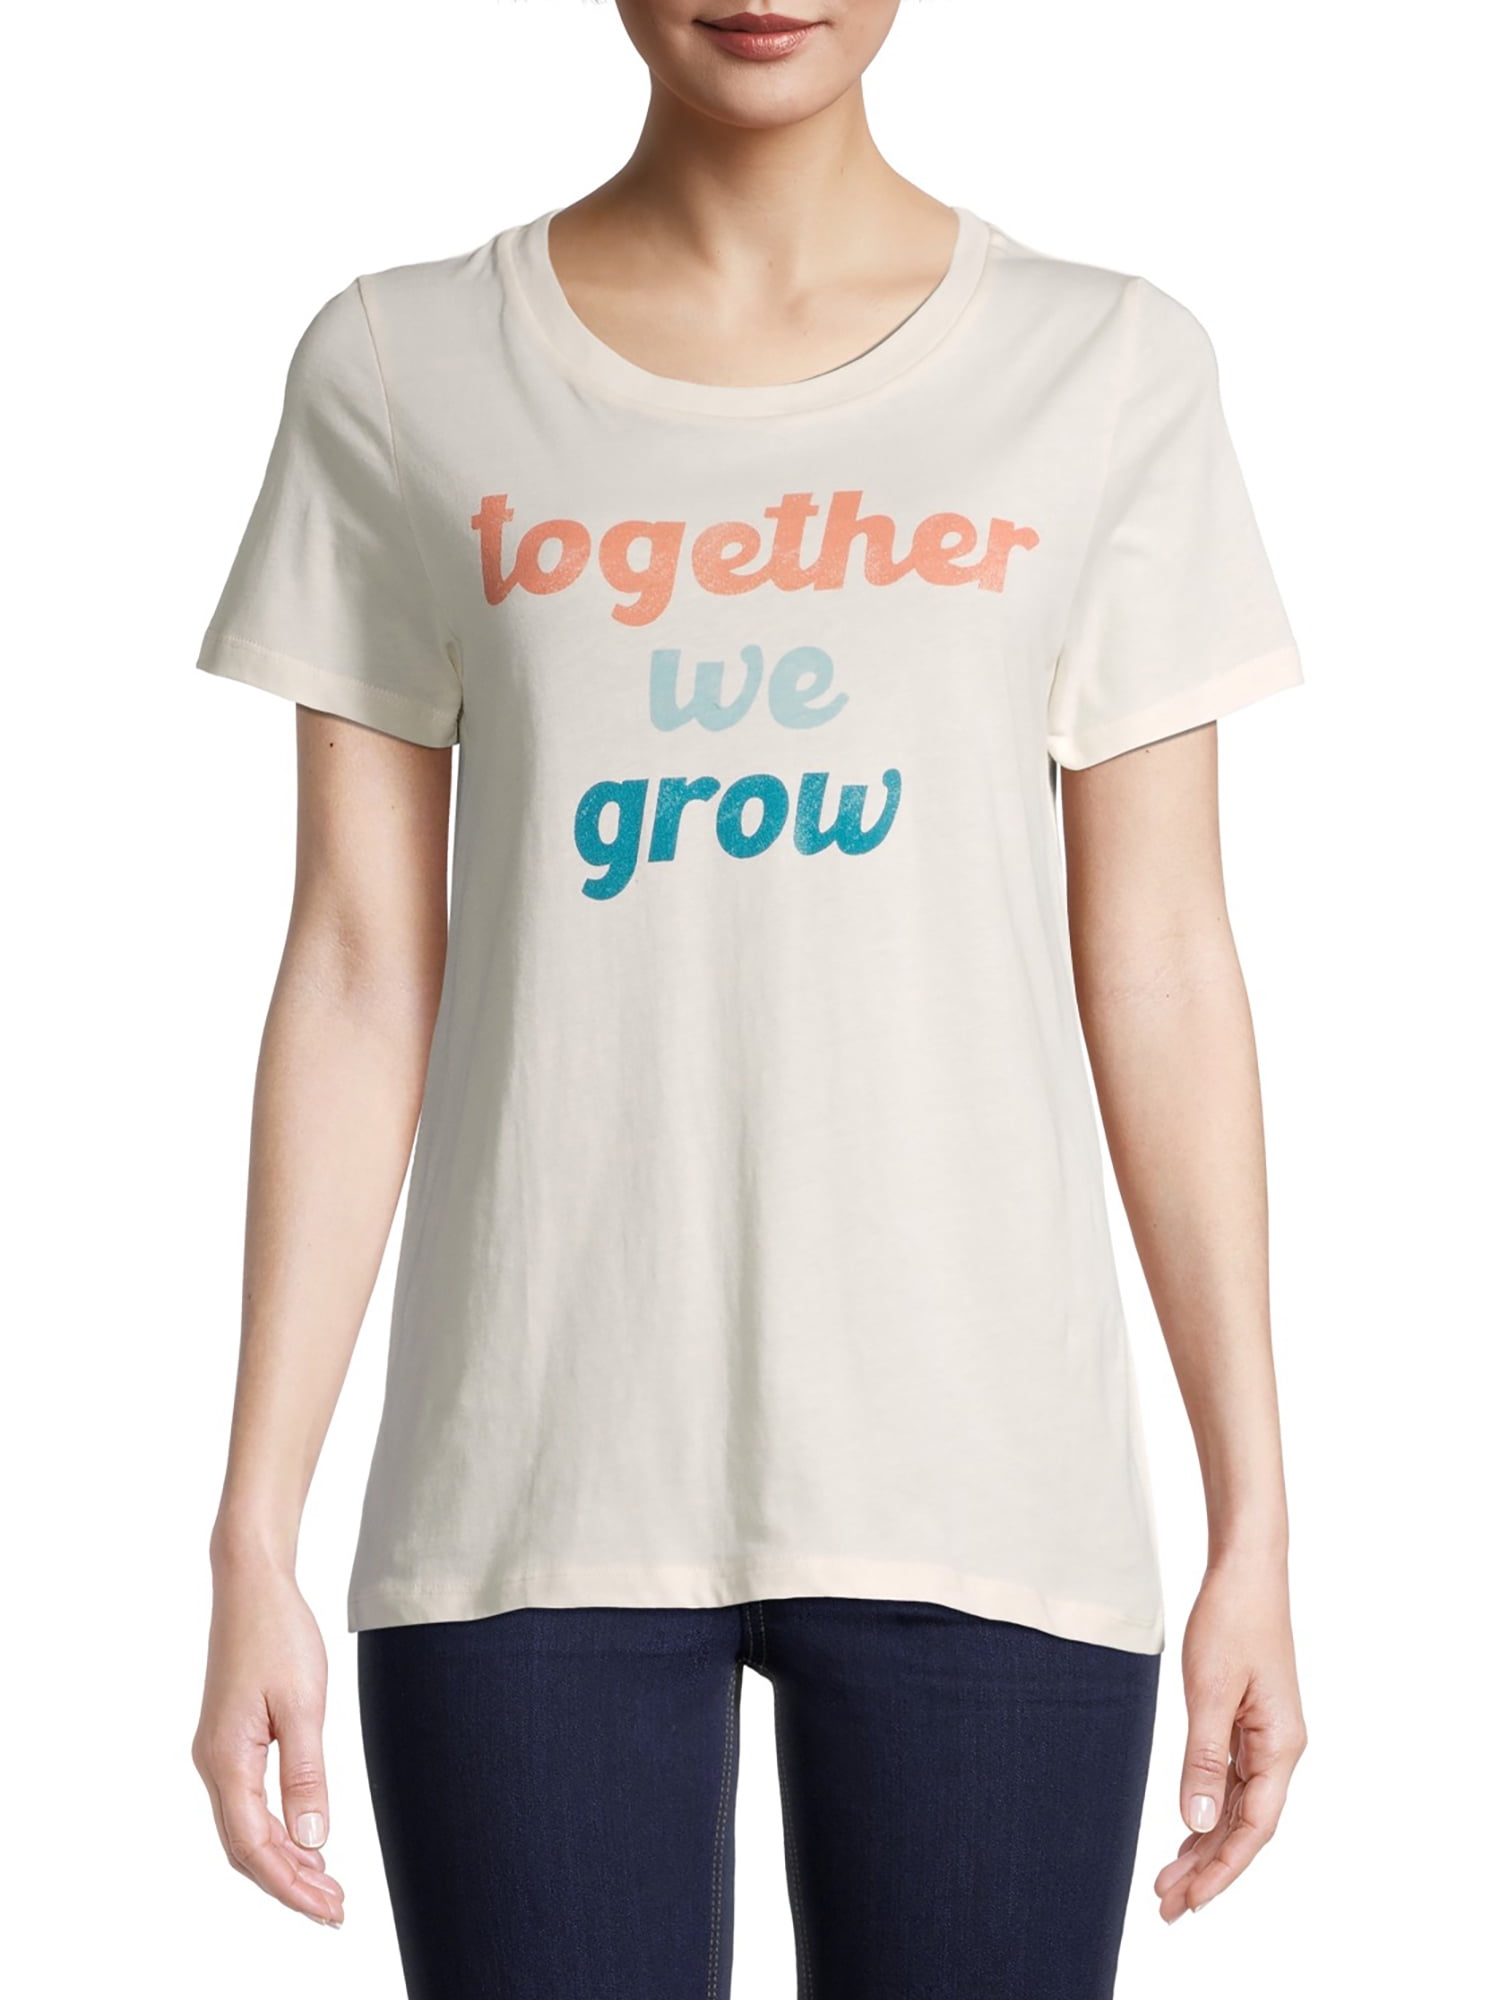 ladies' graphic tee good vibes t-shirt dandelion t-shirt cute t-shirt inspirational shirt Keep Growing positive vibes gift for her